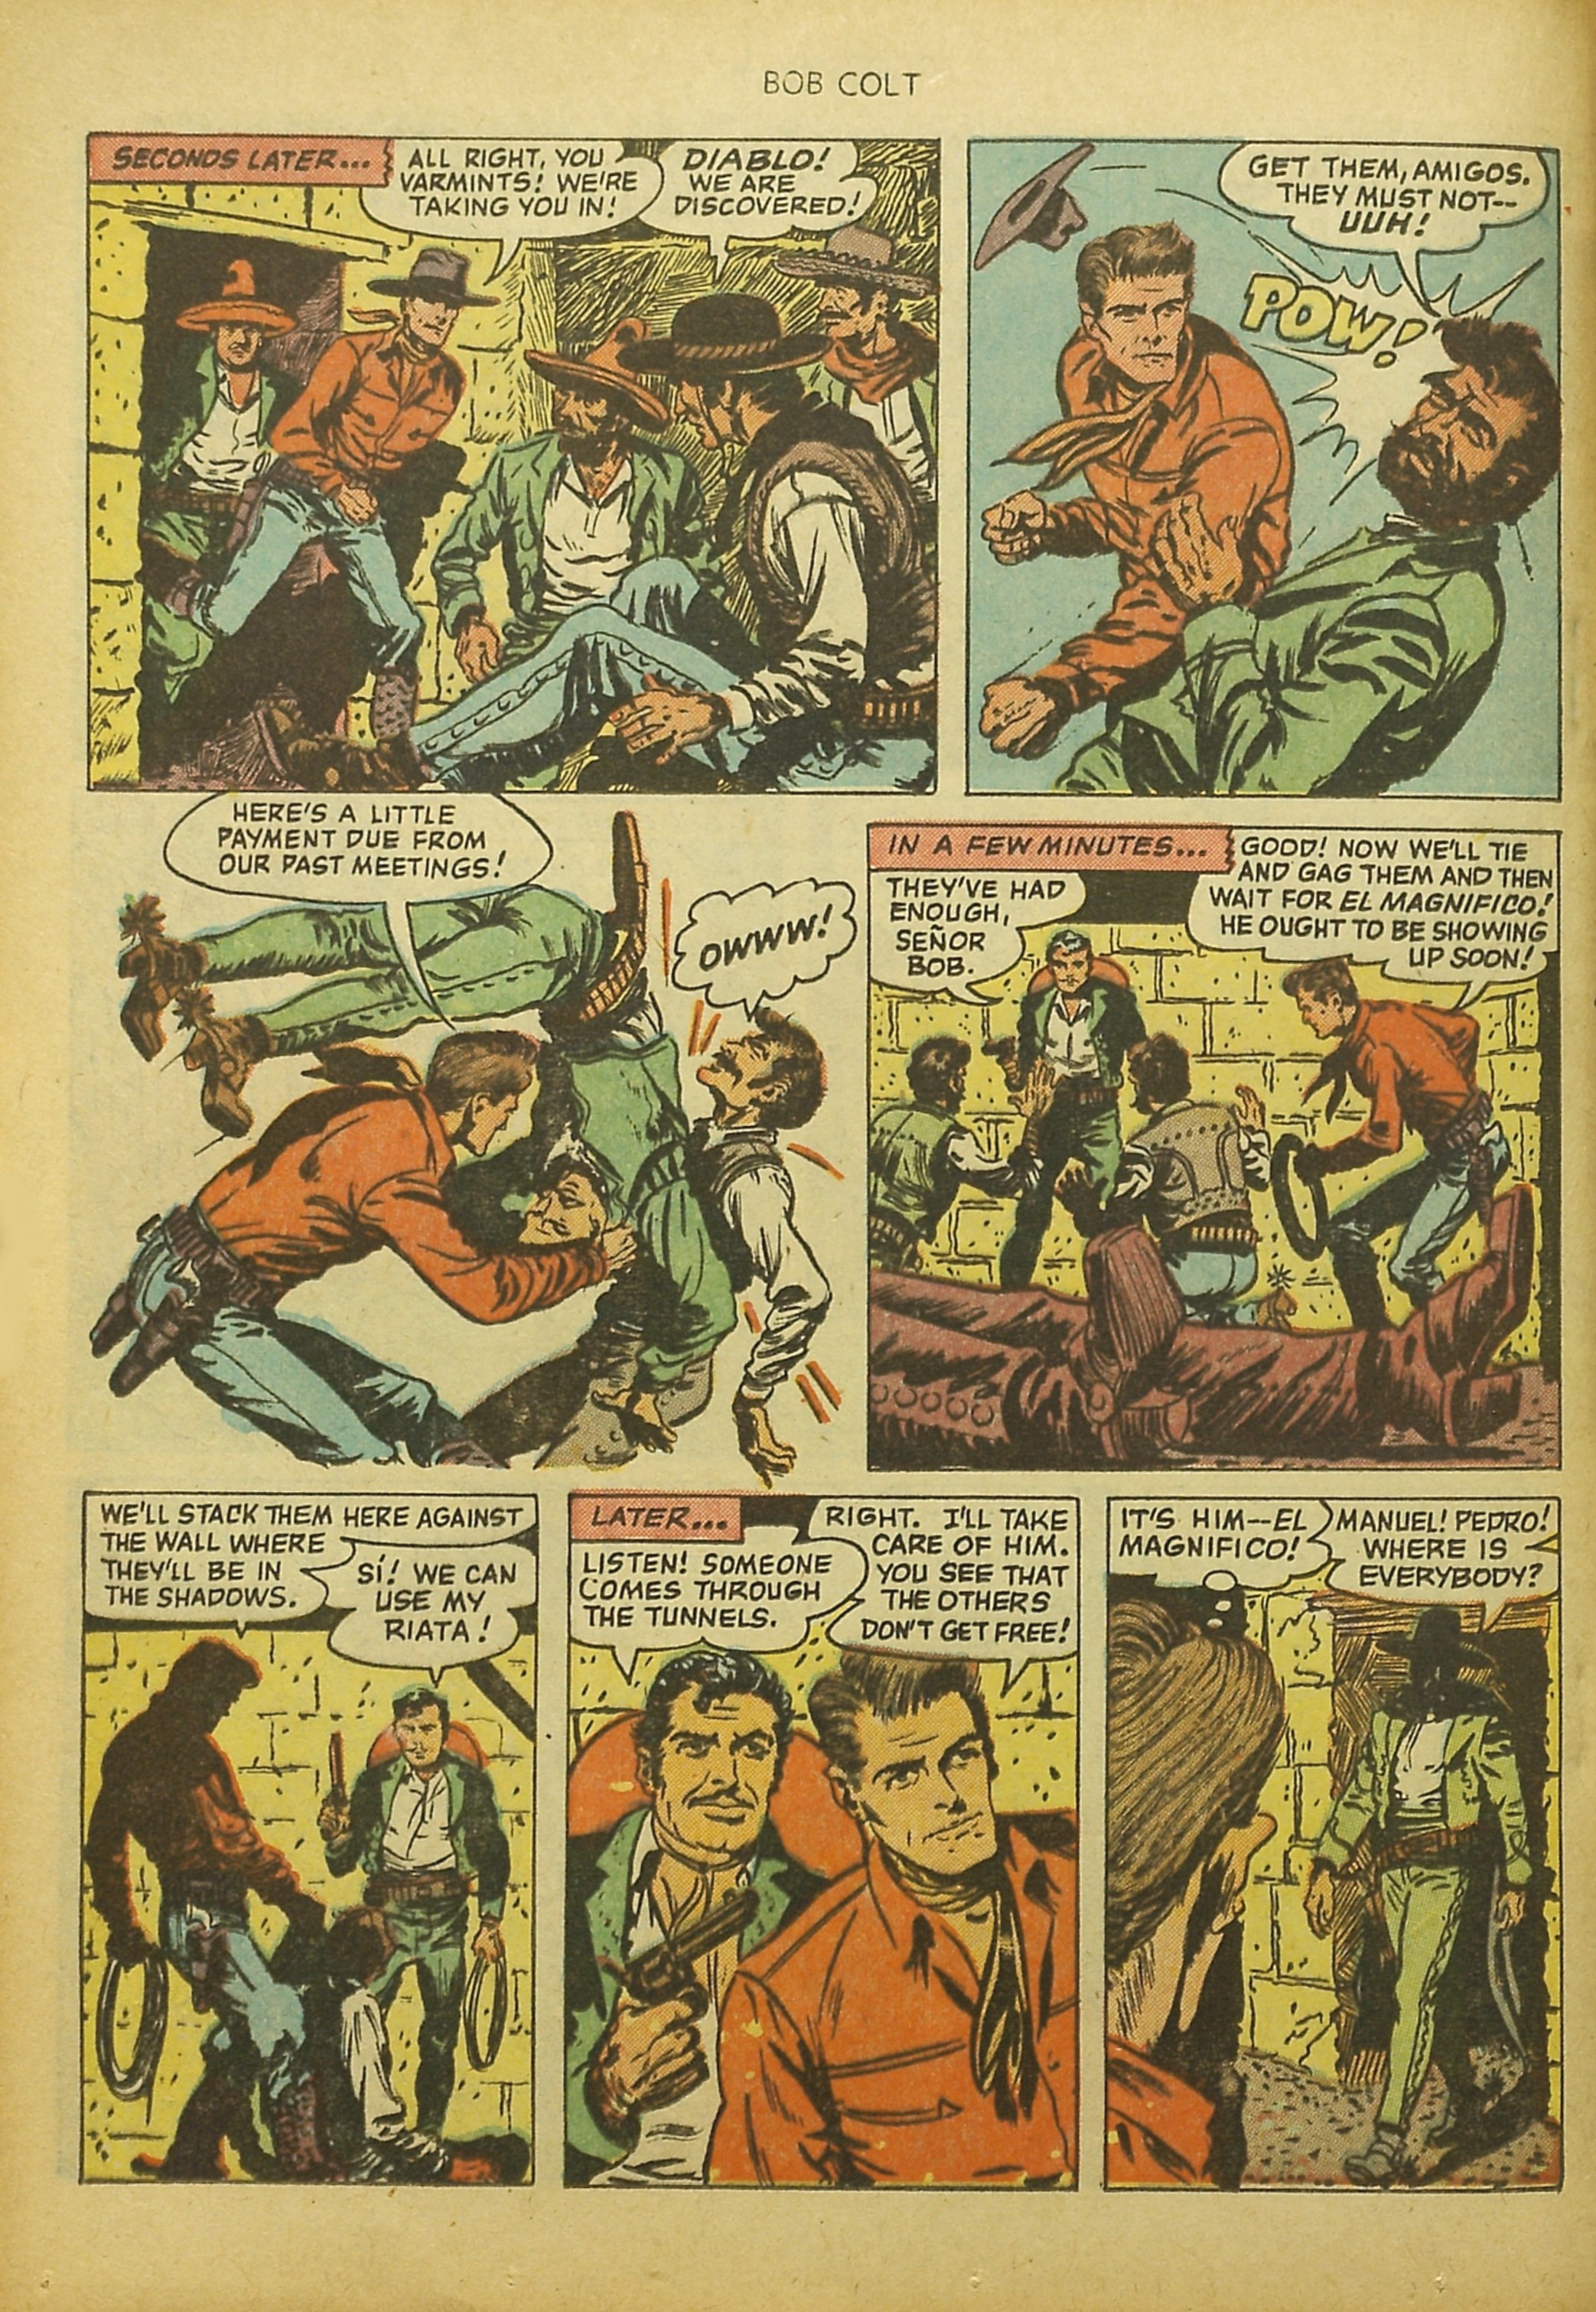 Read online Bob Colt Western comic -  Issue #9 - 14